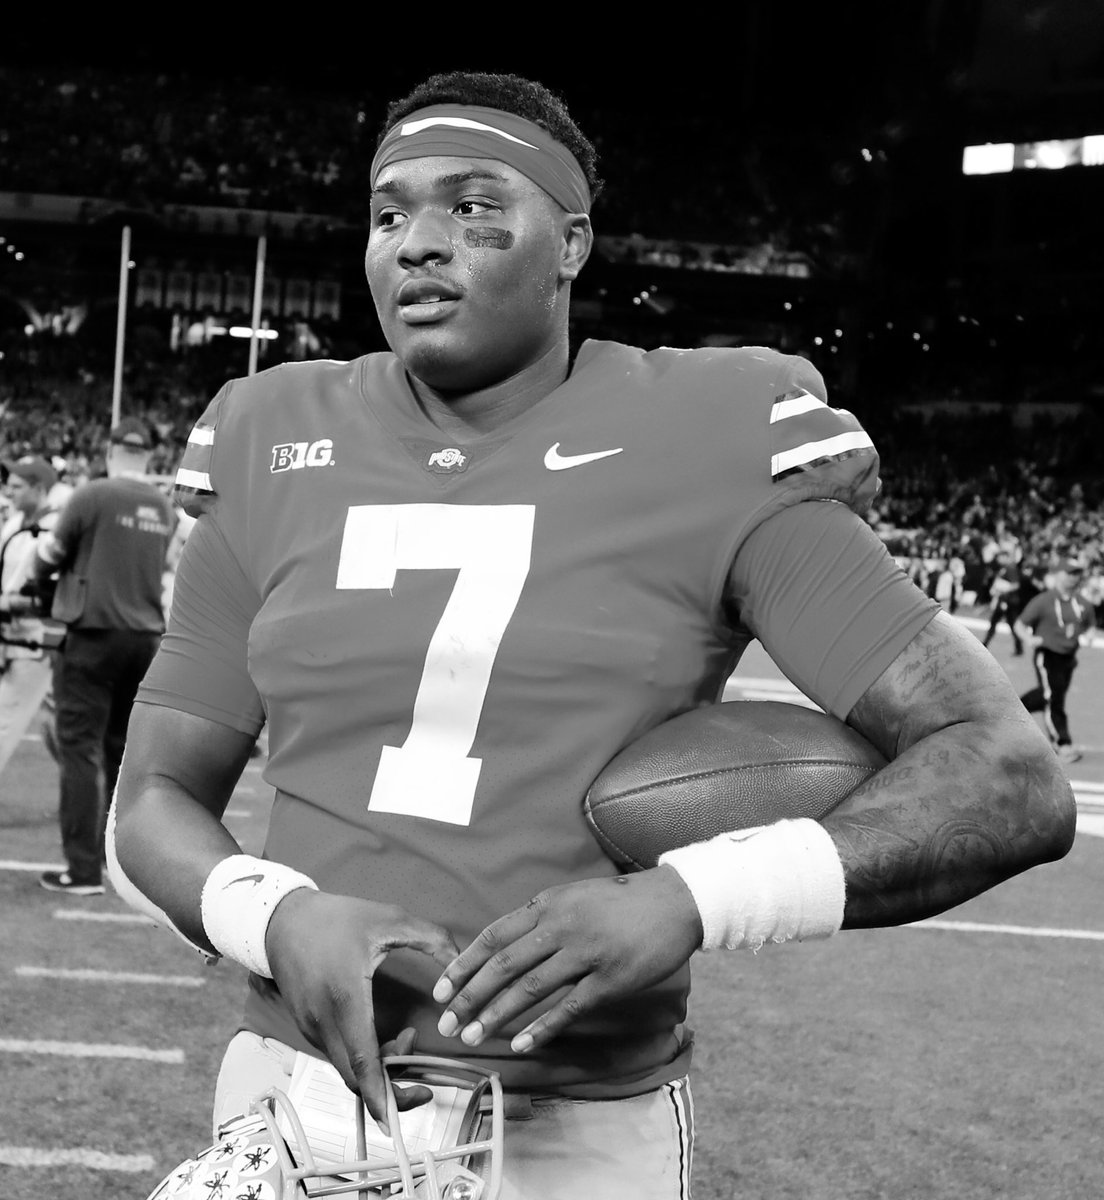 Happy Birthday Dwayne Haskins. ❤️ Continue to rest peacefully. 🙏